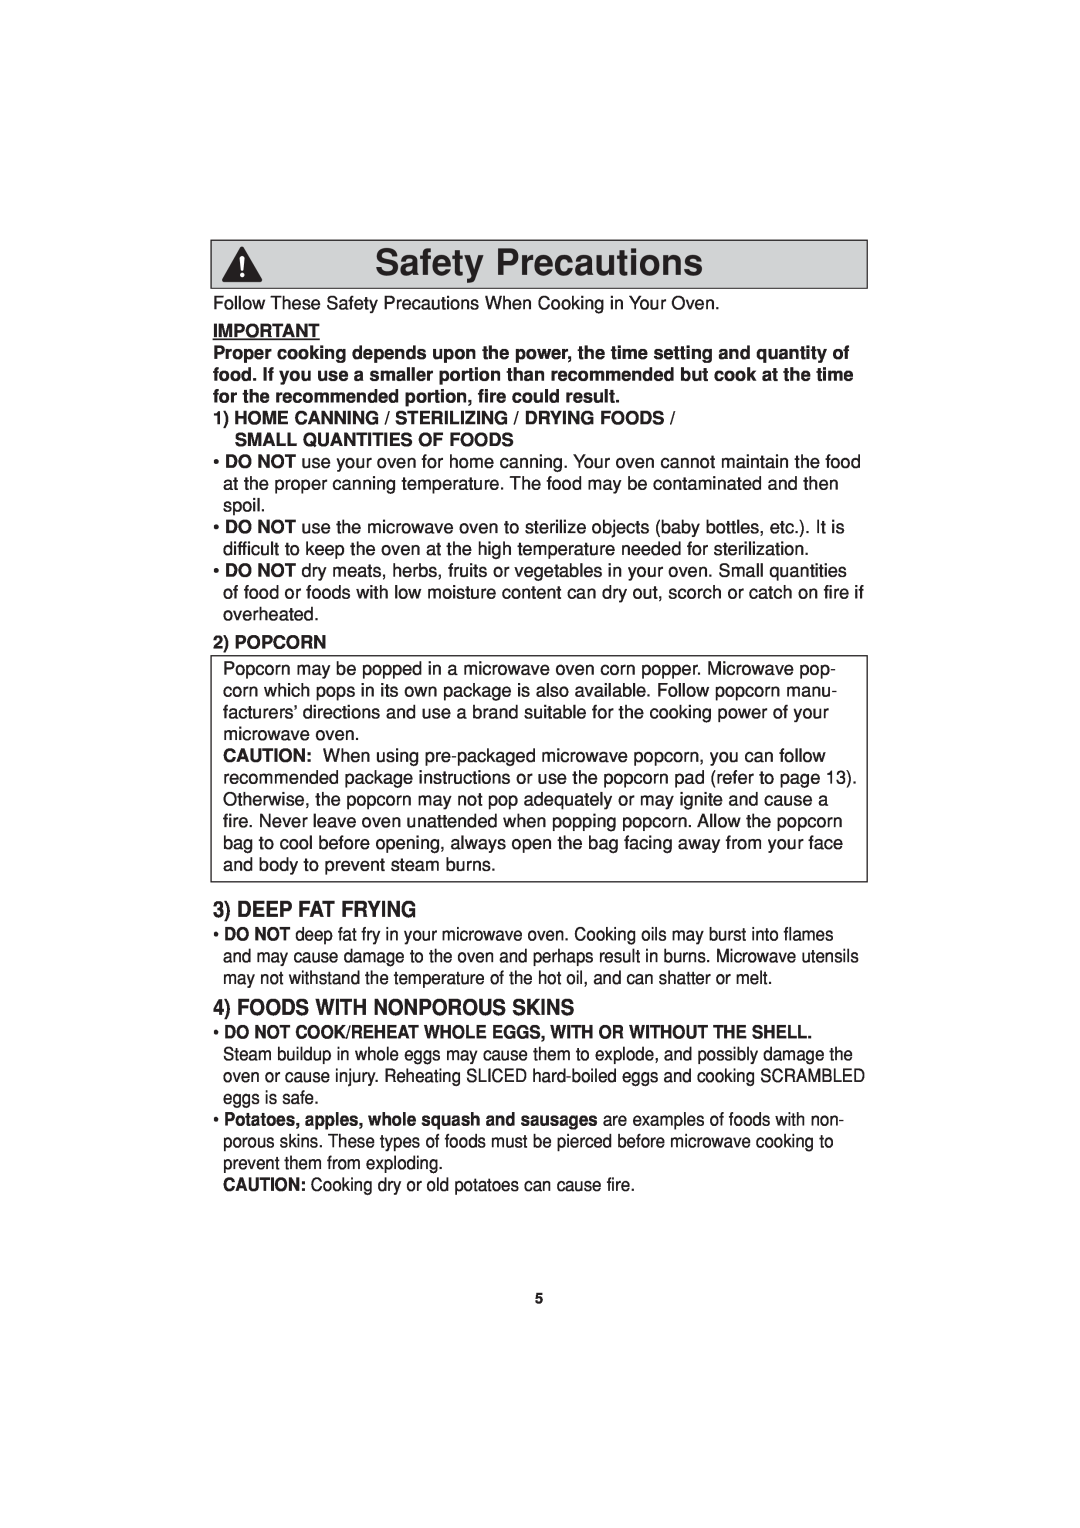 Panasonic NN-T694 operating instructions Safety Precautions, Deep Fat Frying, Foods With Nonporous Skins 